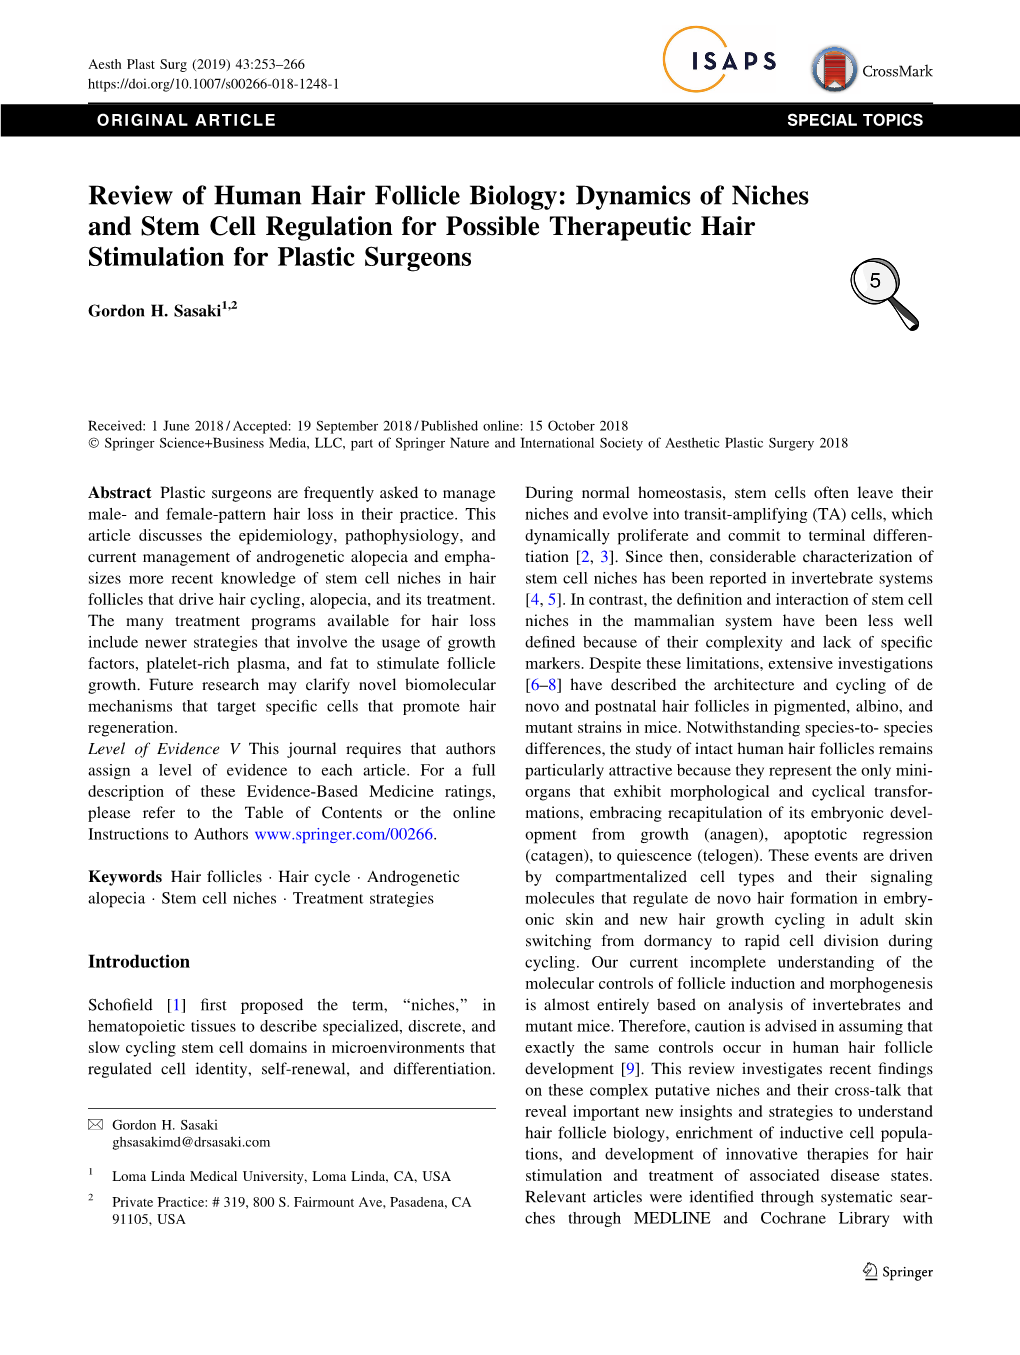 Review of Human Hair Follicle Biology: Dynamics of Niches and Stem Cell Regulation for Possible Therapeutic Hair Stimulation for Plastic Surgeons